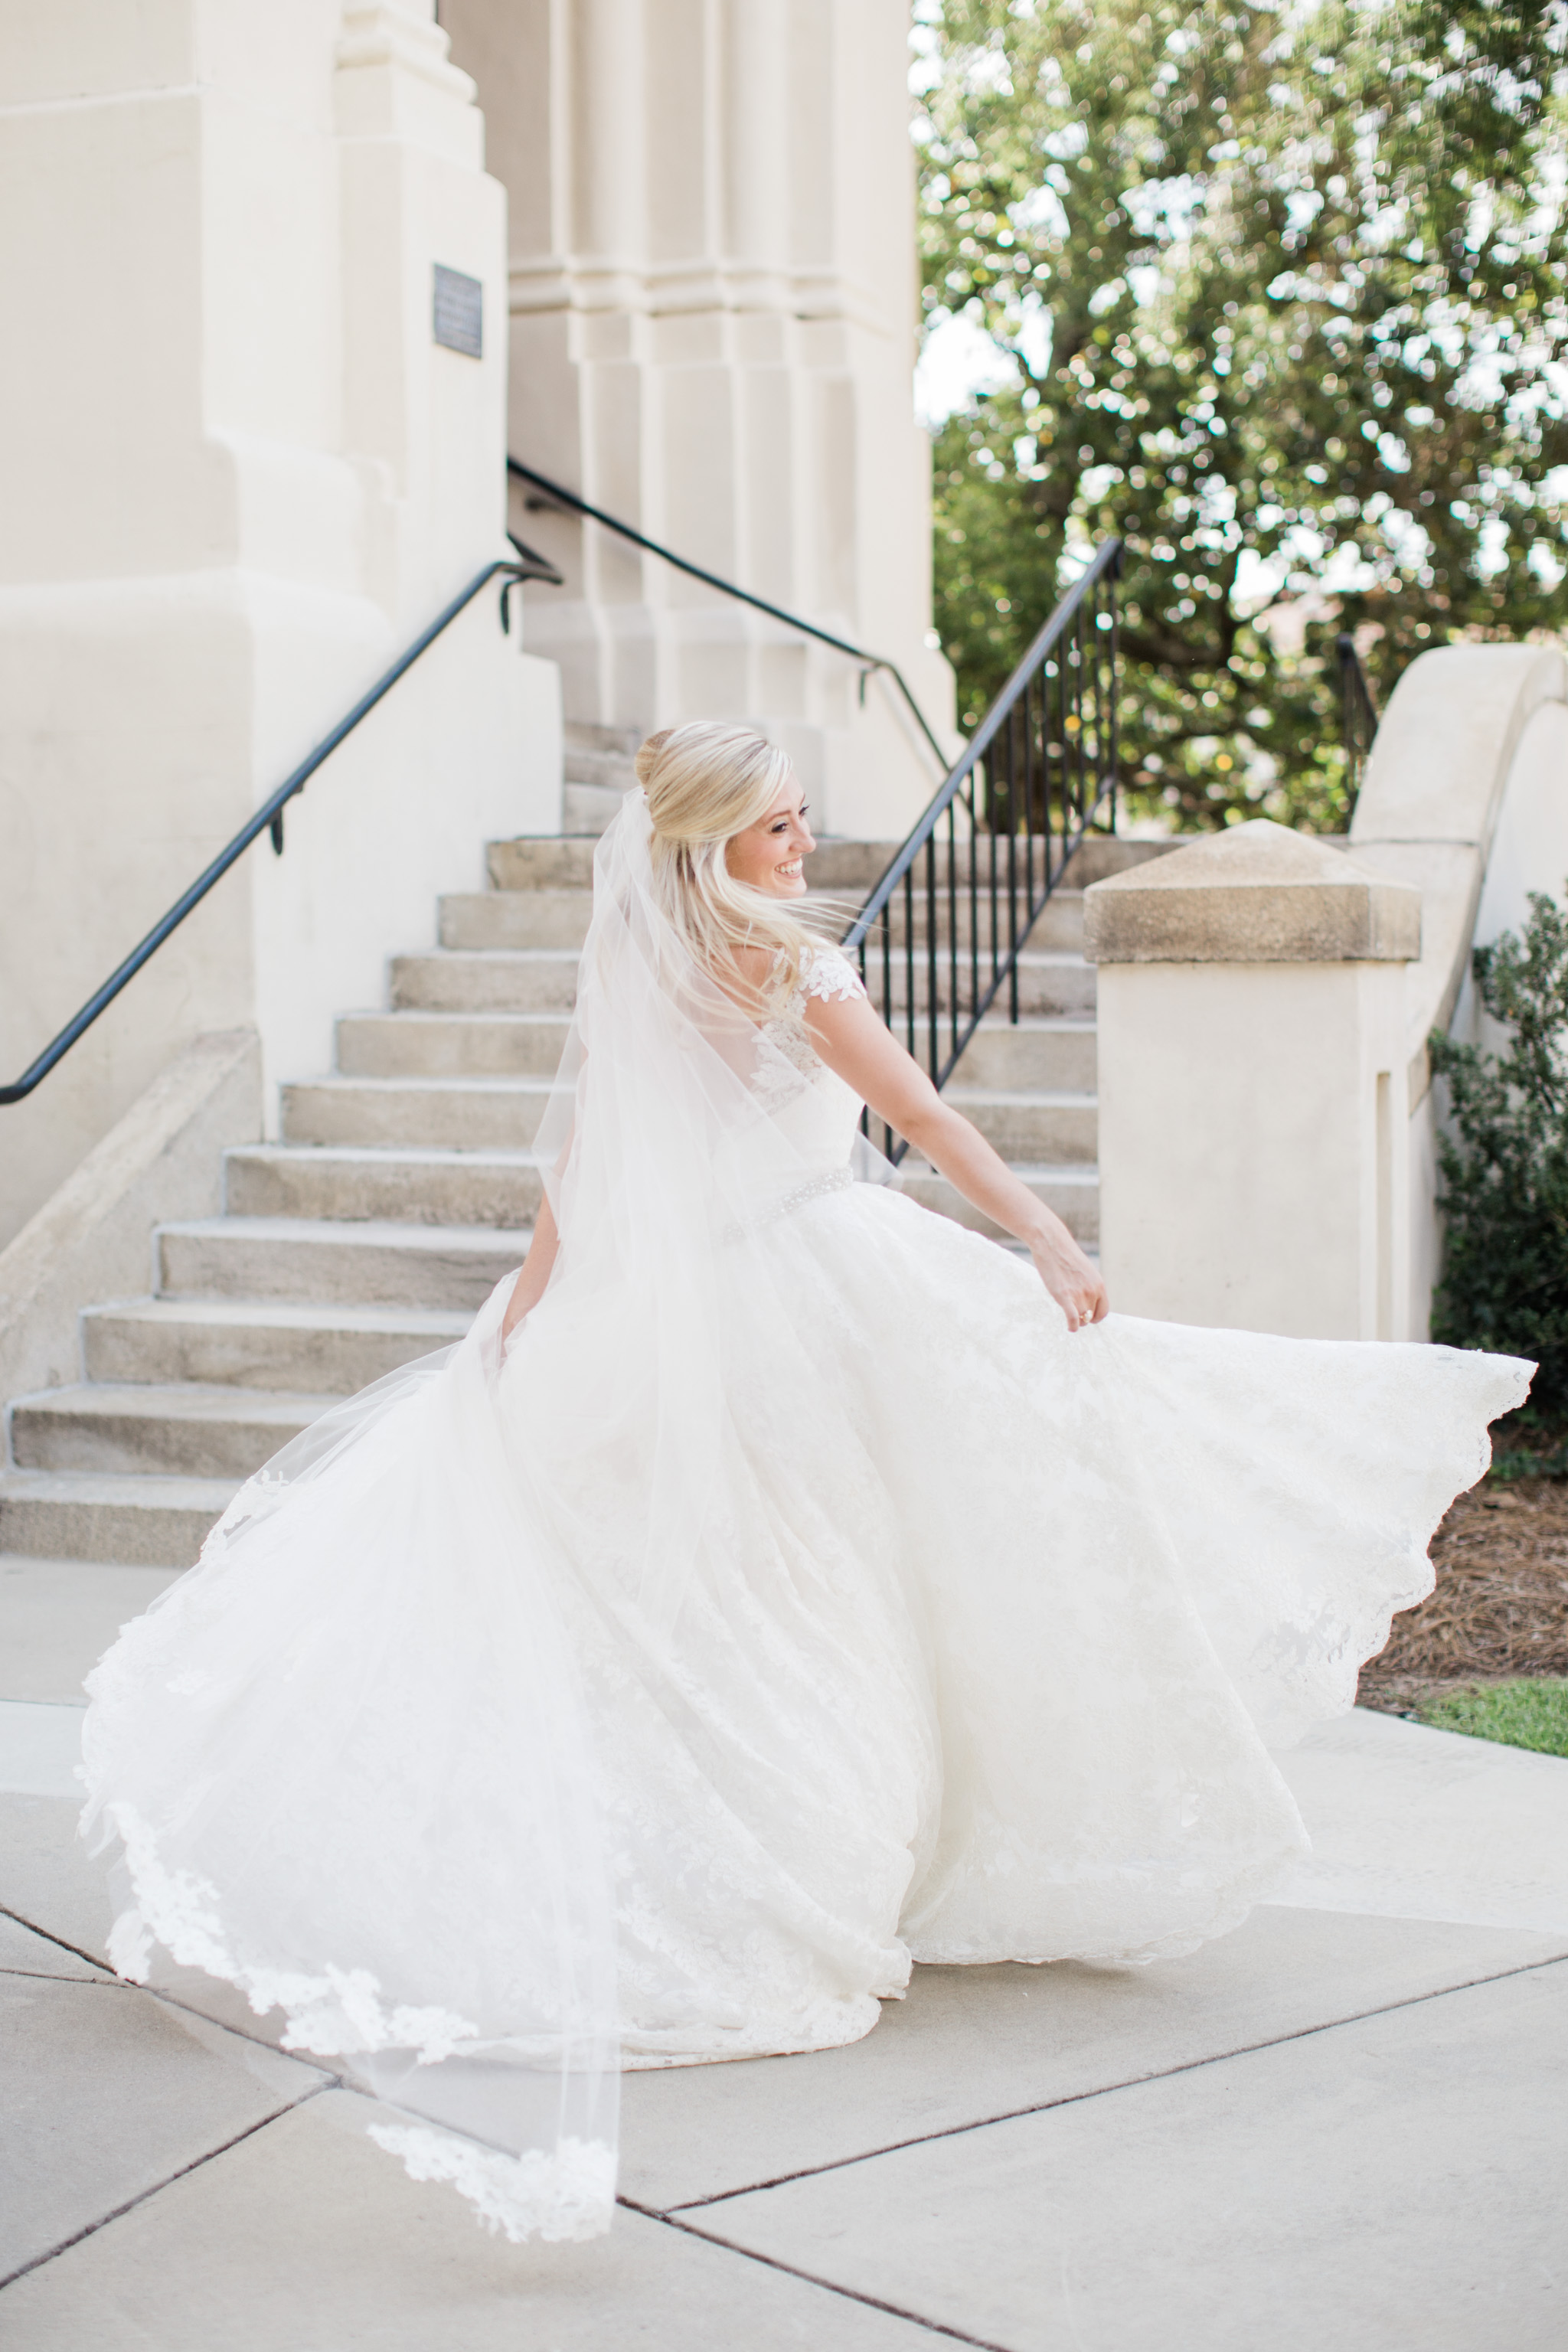 Sometimes girls just want to have fun. This bride was all joy as she spun in her wedding dress. Photo by Rebecca Cerasani, photographer for the luxury bride.